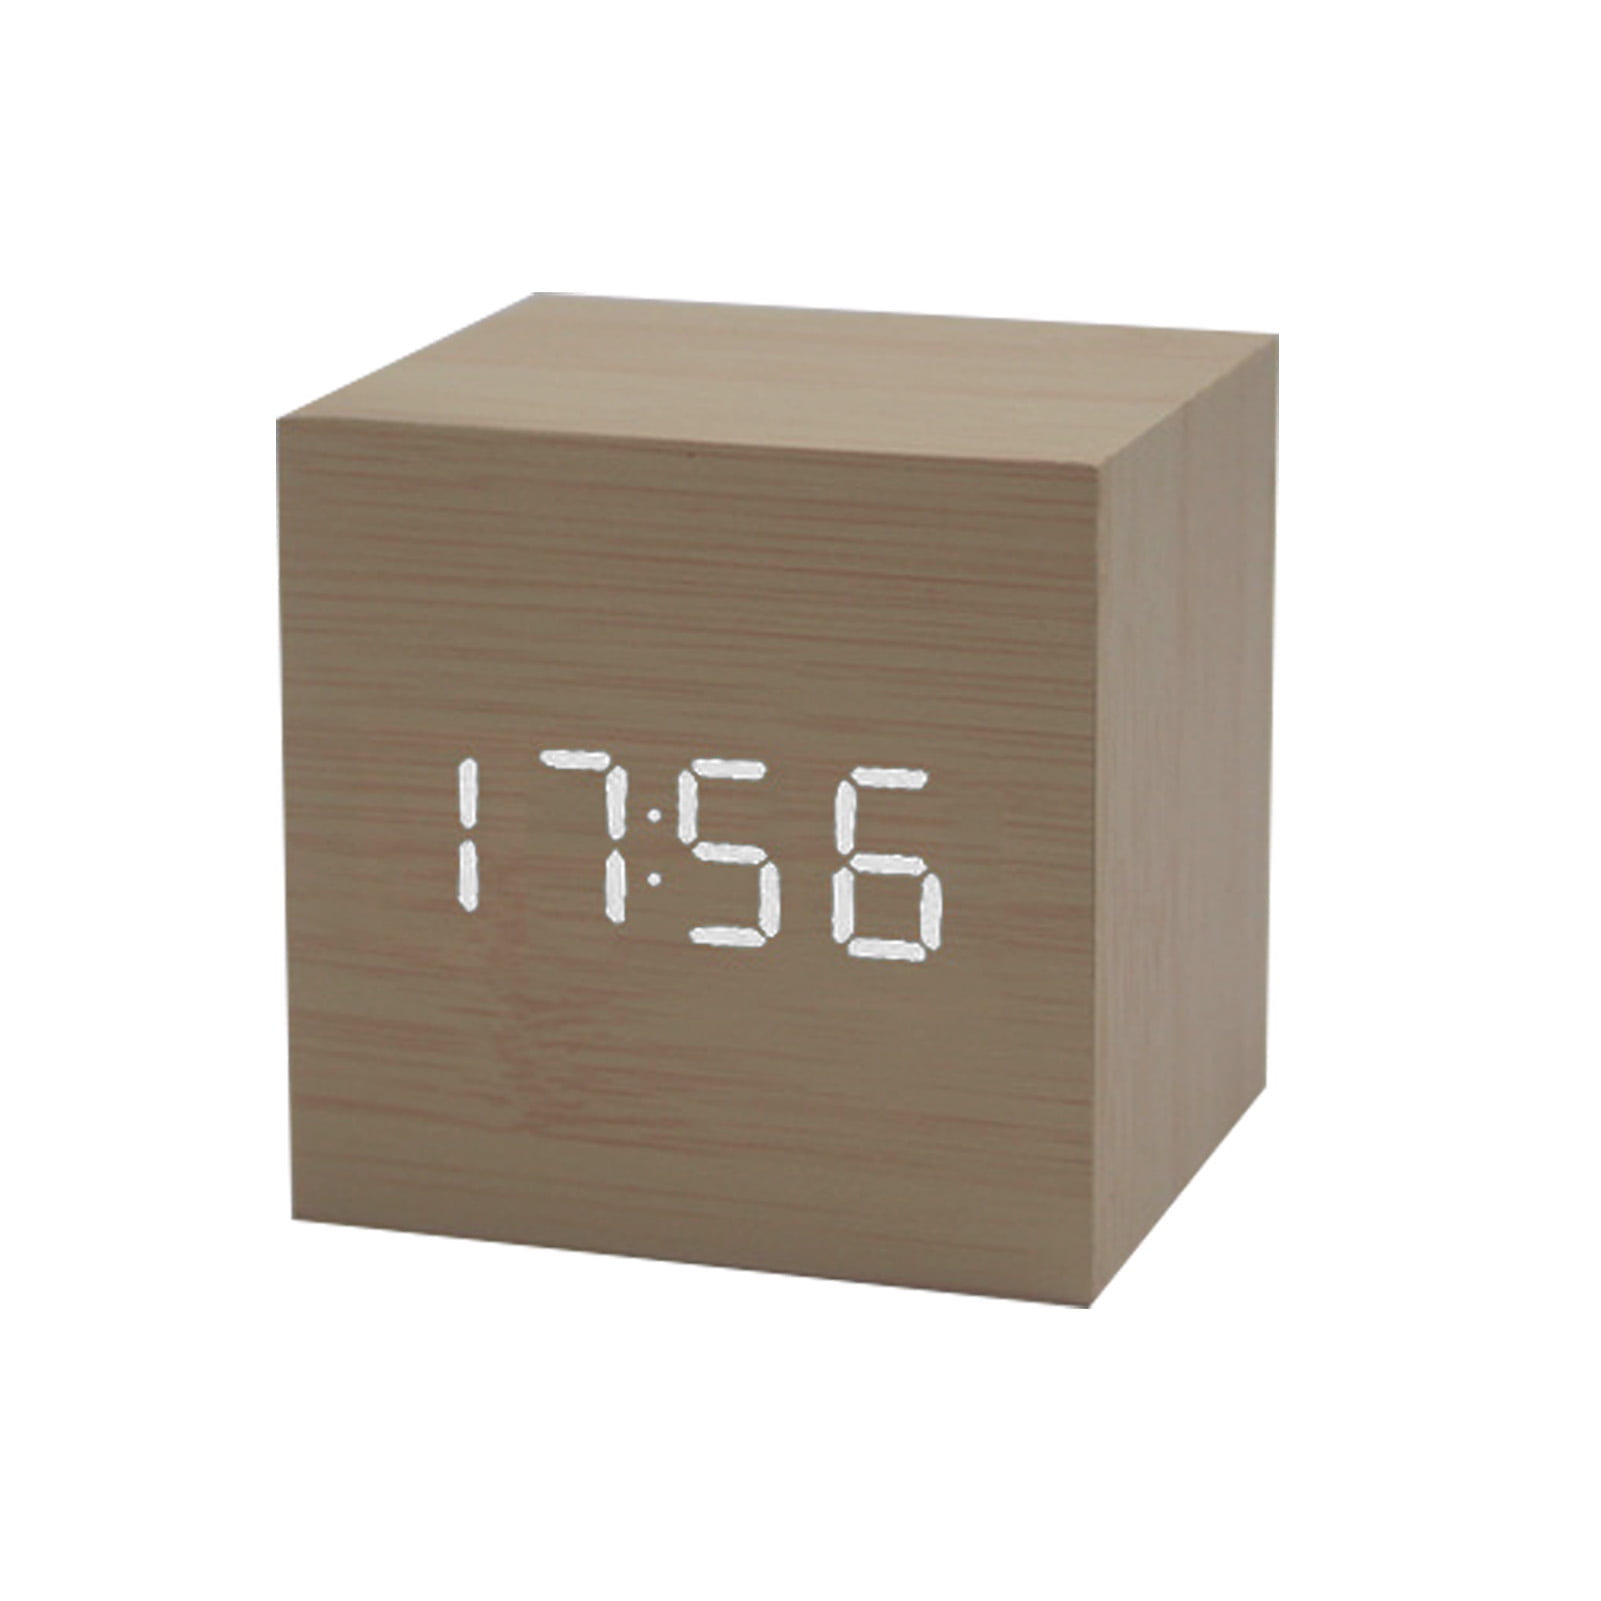 Details about   Digital LED Wooden Alarm Clock Temperature Table Electronic Clocks Voice Control 